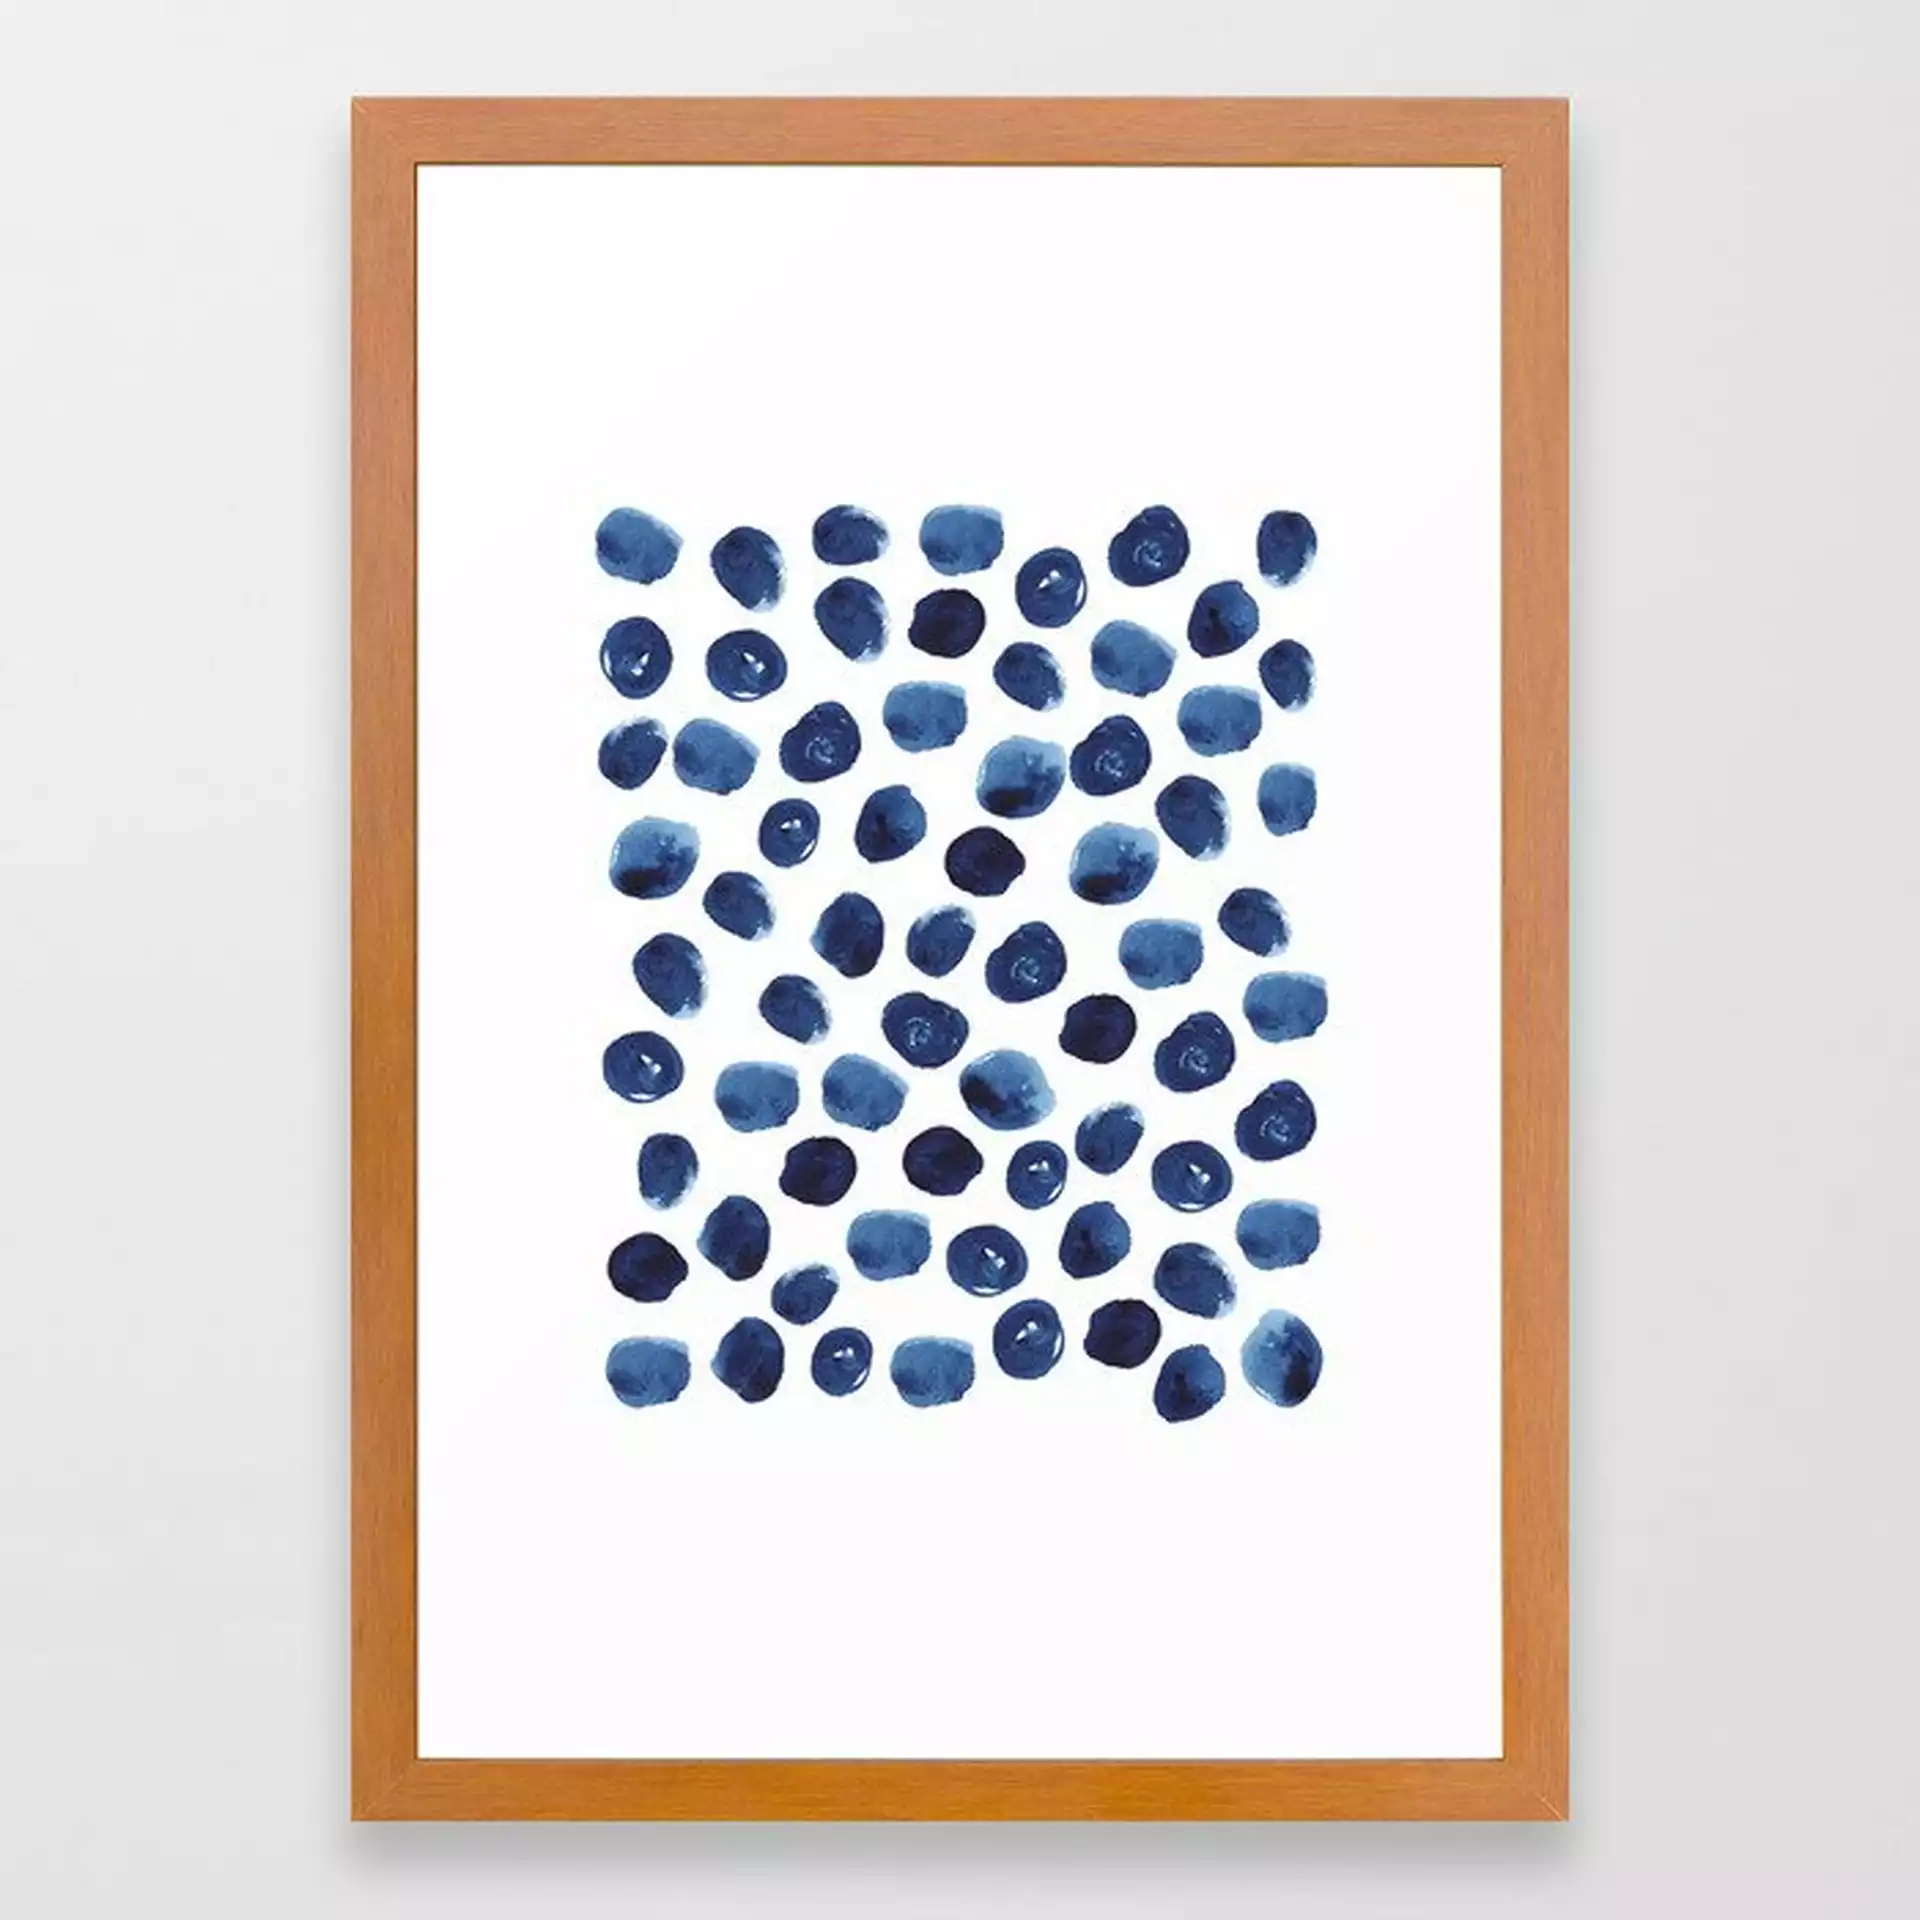 India - Blue Paint, Ink Spots, Design, Watercolor Brush, Dots, Cell Phone Case Framed Art Print by Charlottewinter - Conservation Pecan - SMALL-15x21